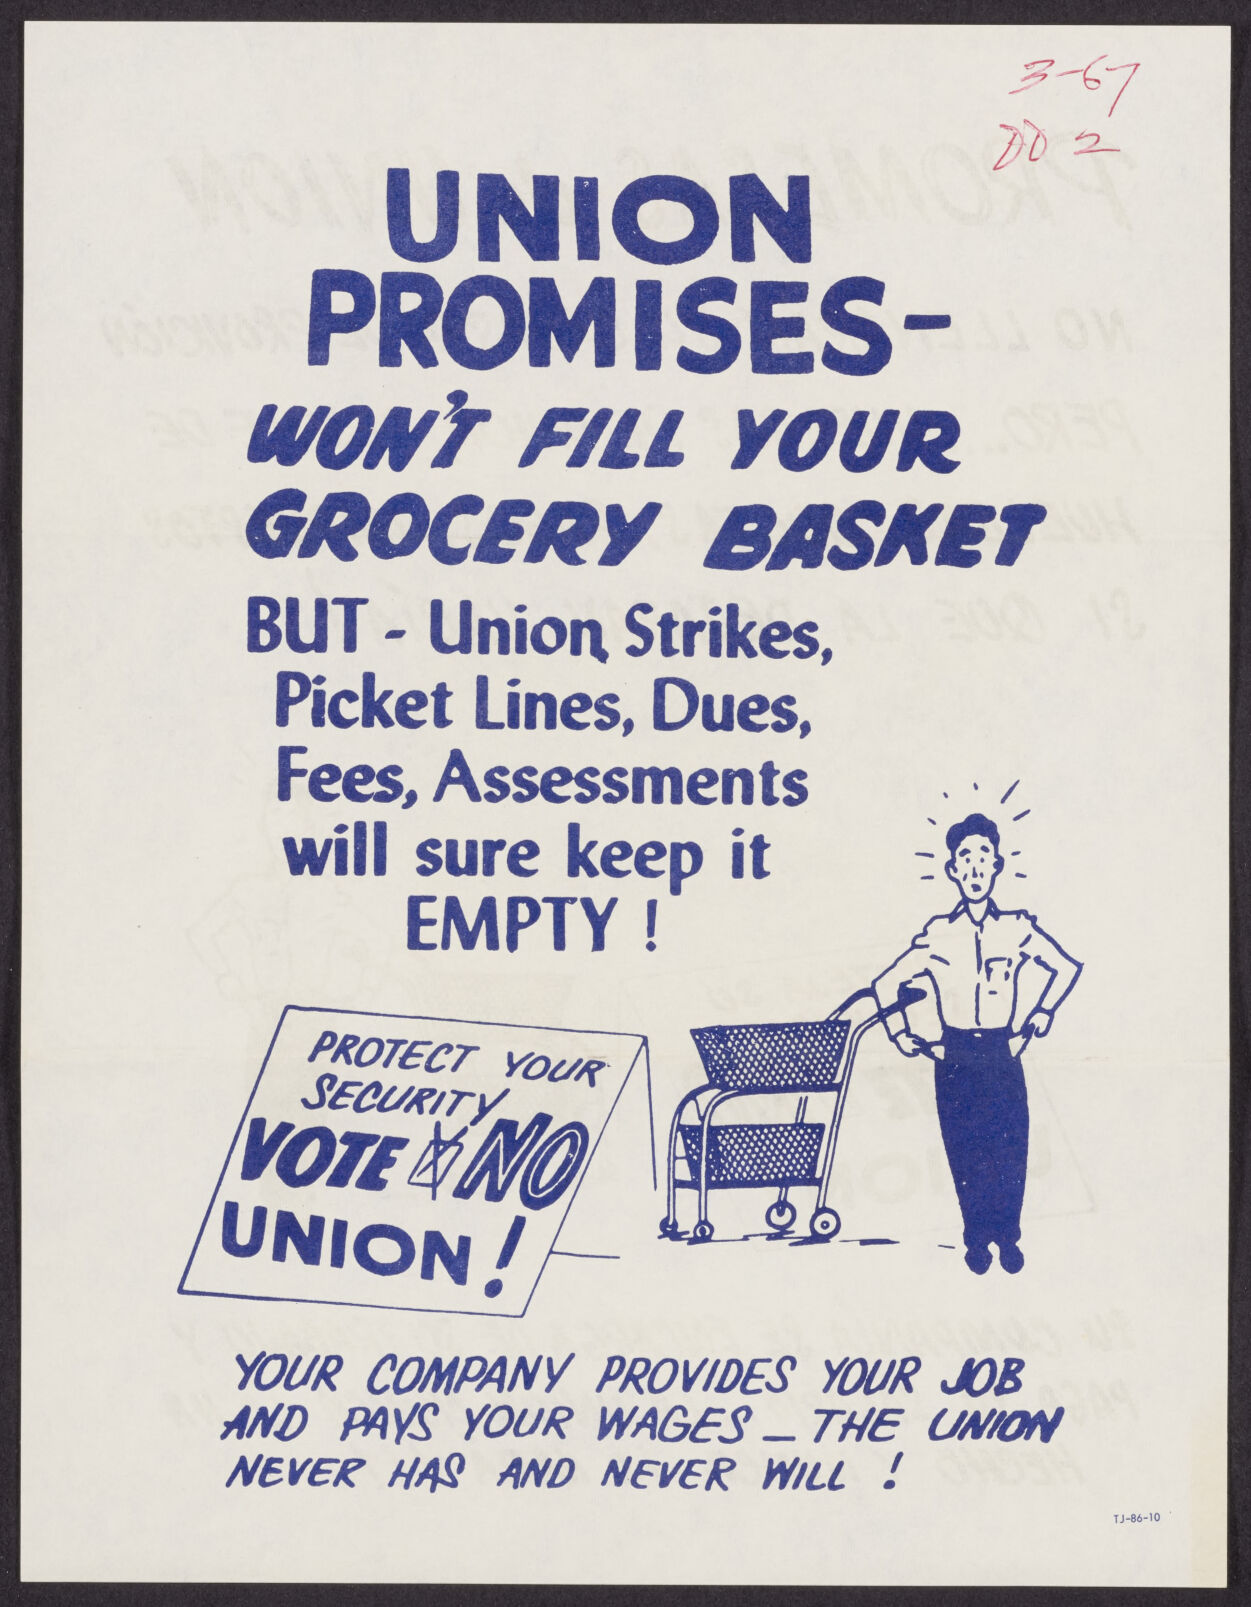 Archived historical poster explaining that lofty union promises won't fill your grocery basket!